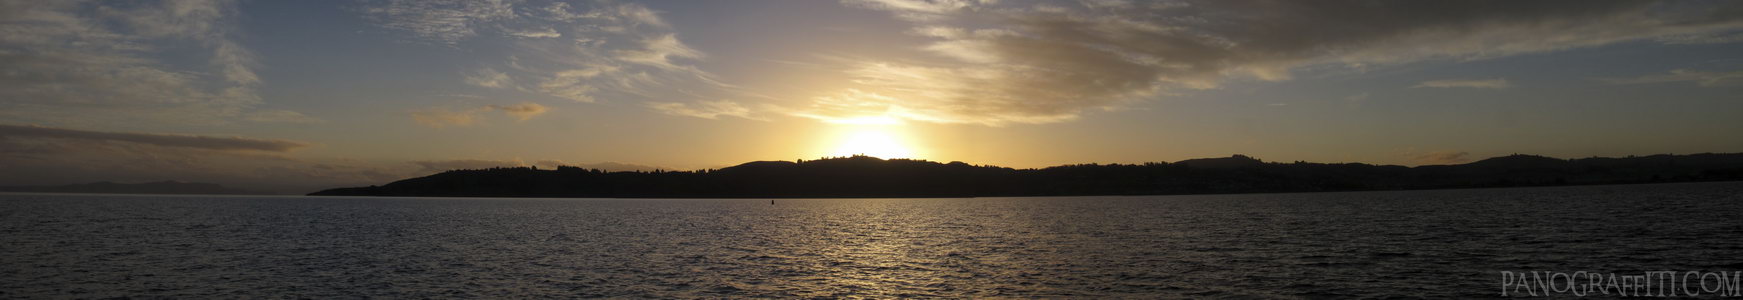 Rainbow Point Sunet - I lived in Taupo for my first three months in New Zealand and never got tired of the sunsets there